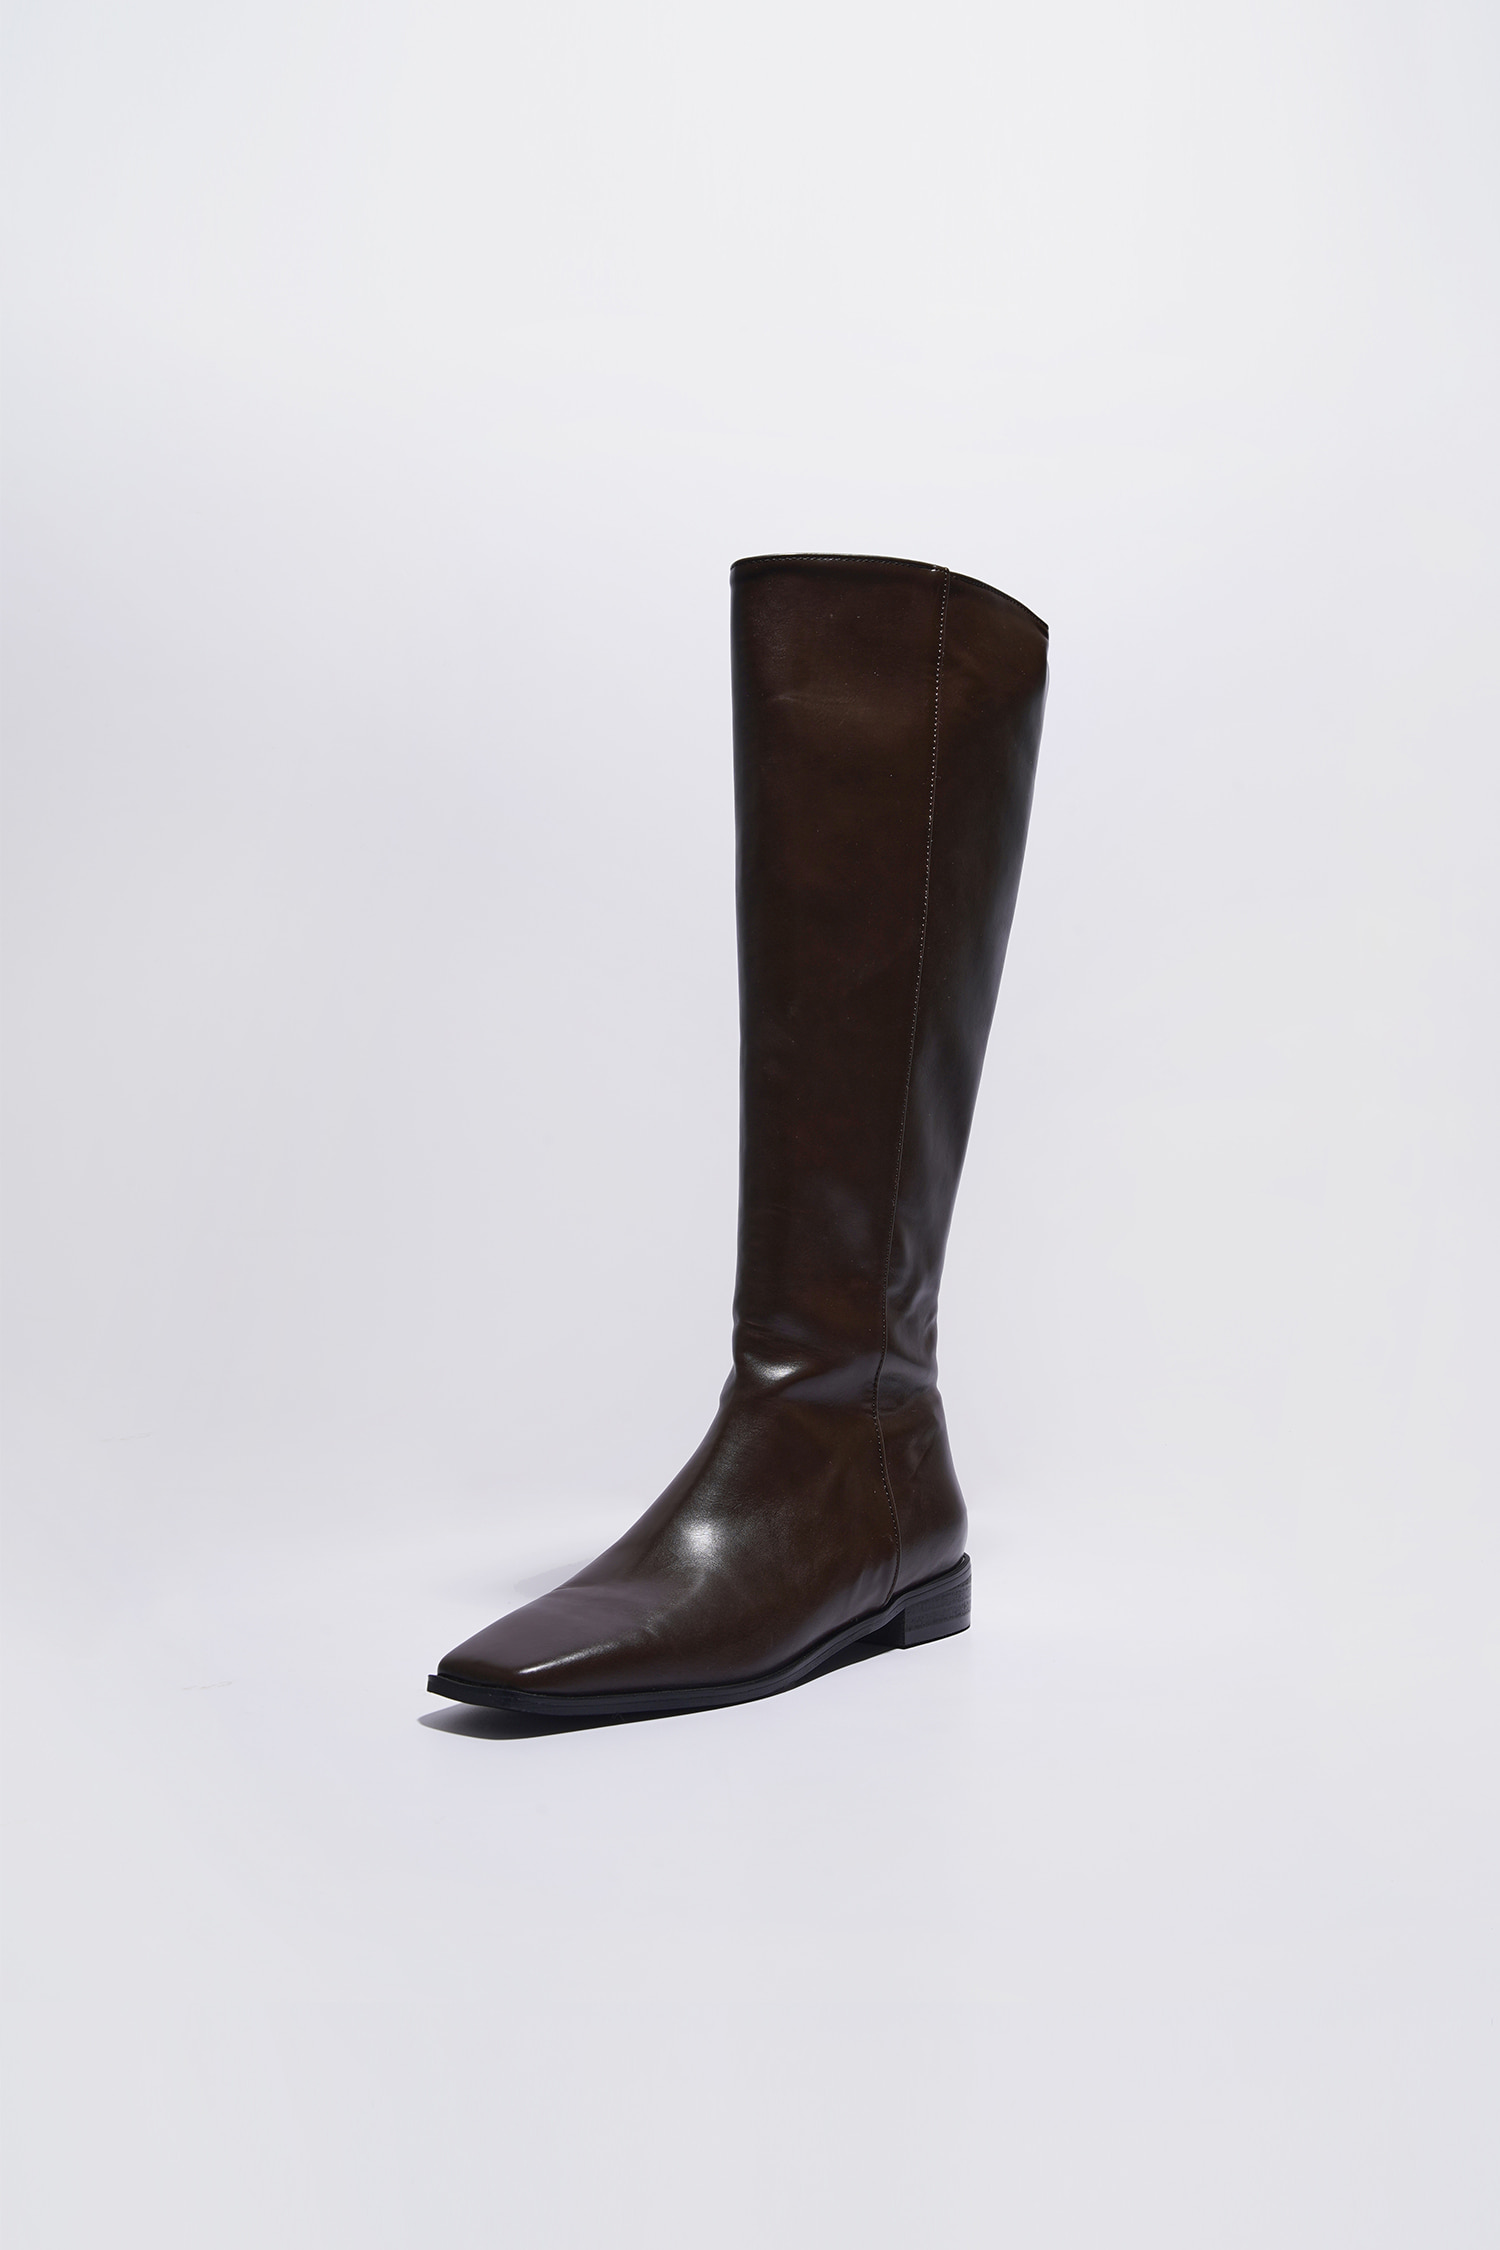 Clair square boots - brown